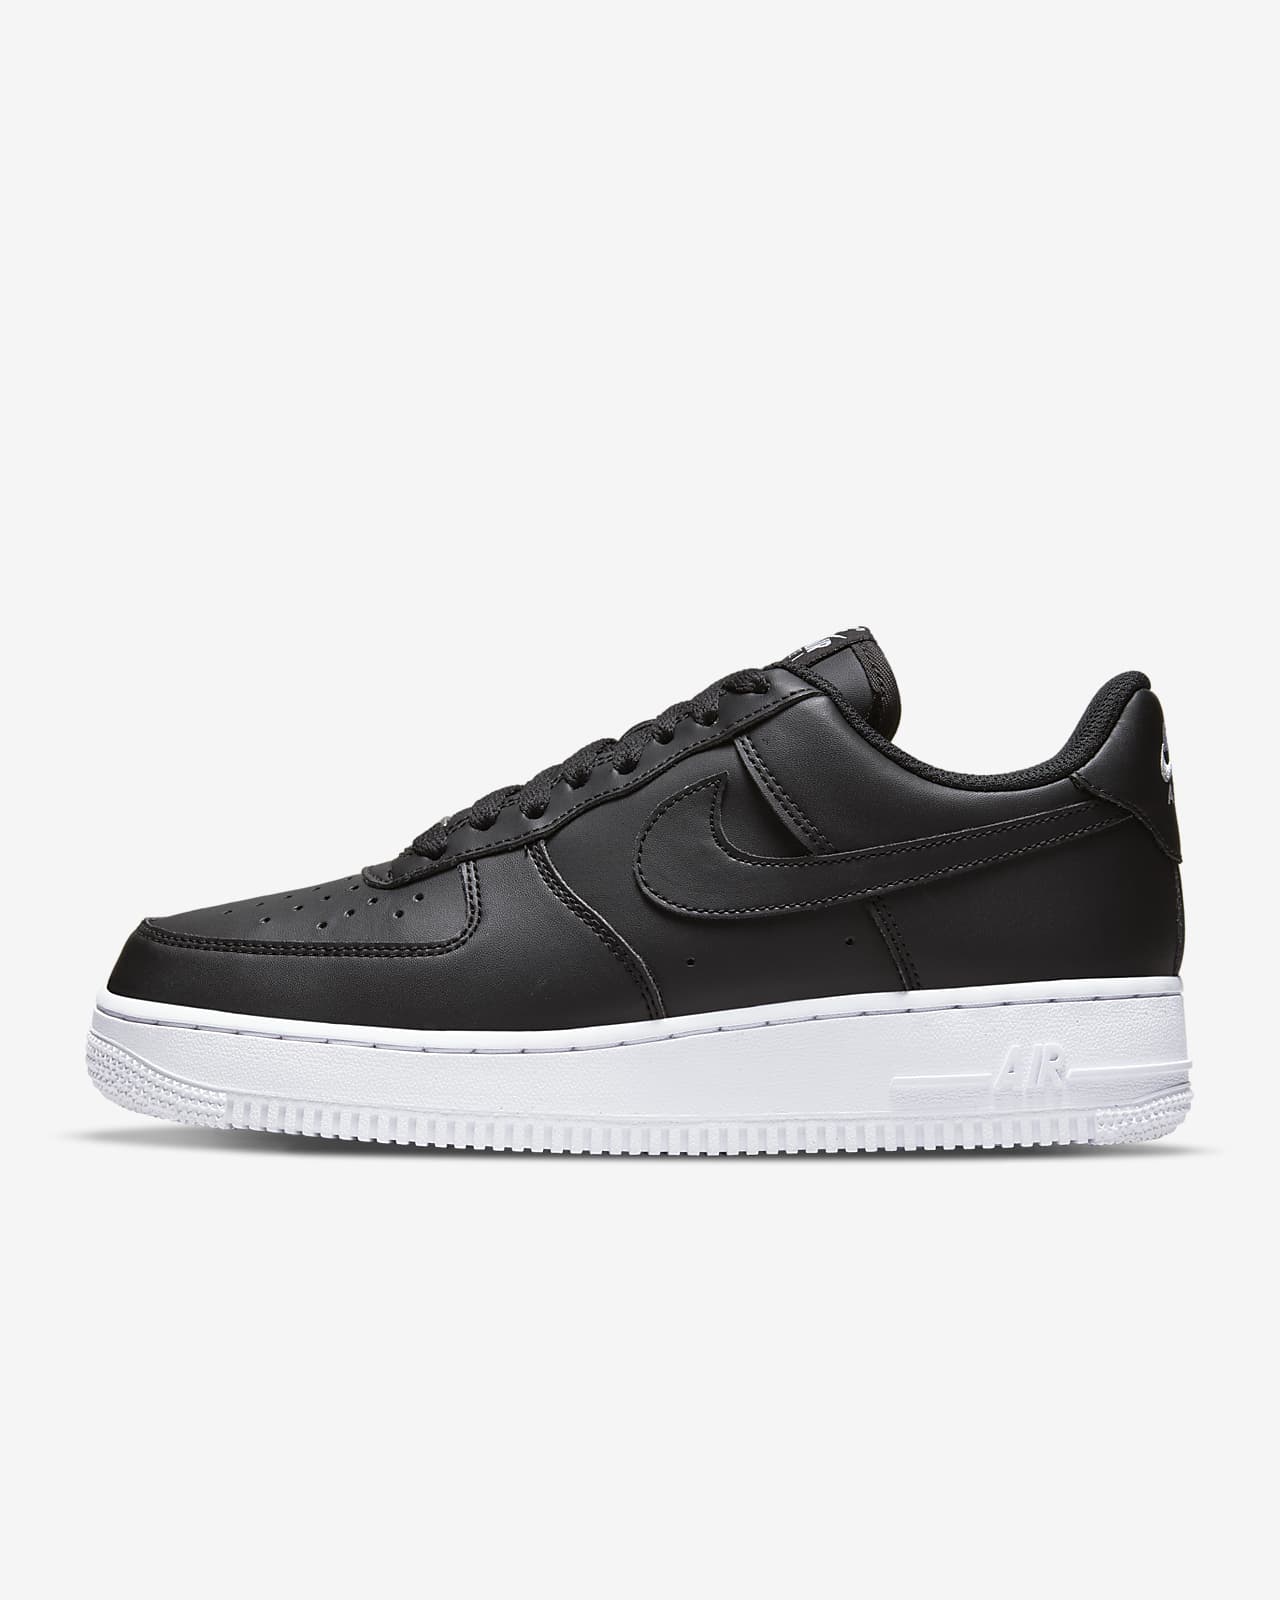 Chaussures Nike Air Force 1 '07 Next Nature pour Femme